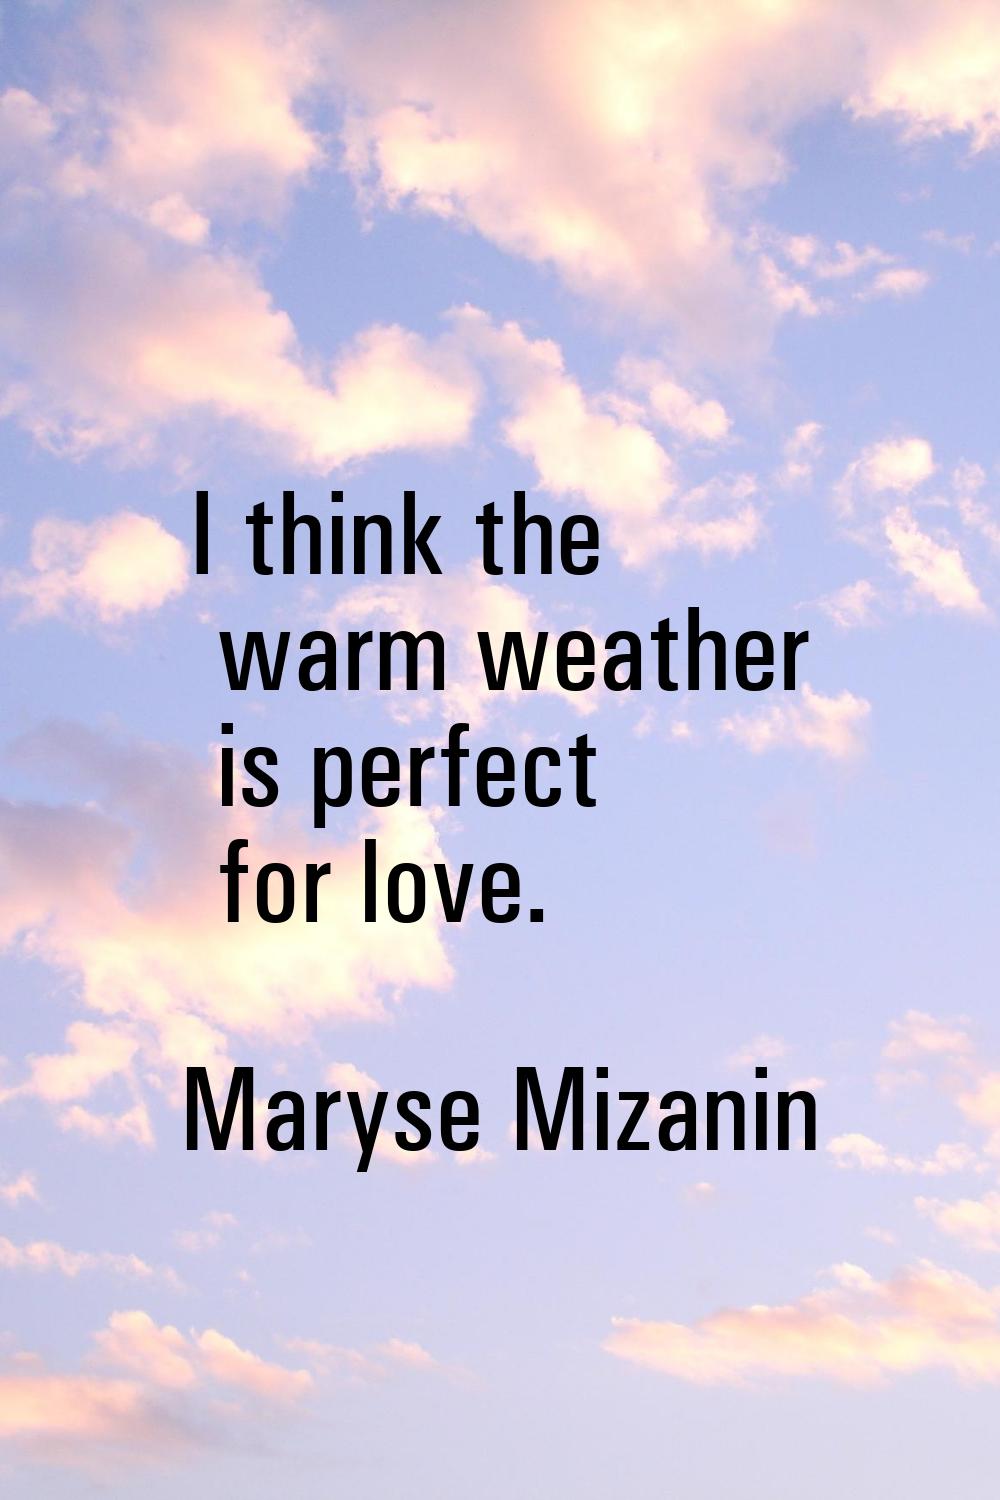 I think the warm weather is perfect for love.